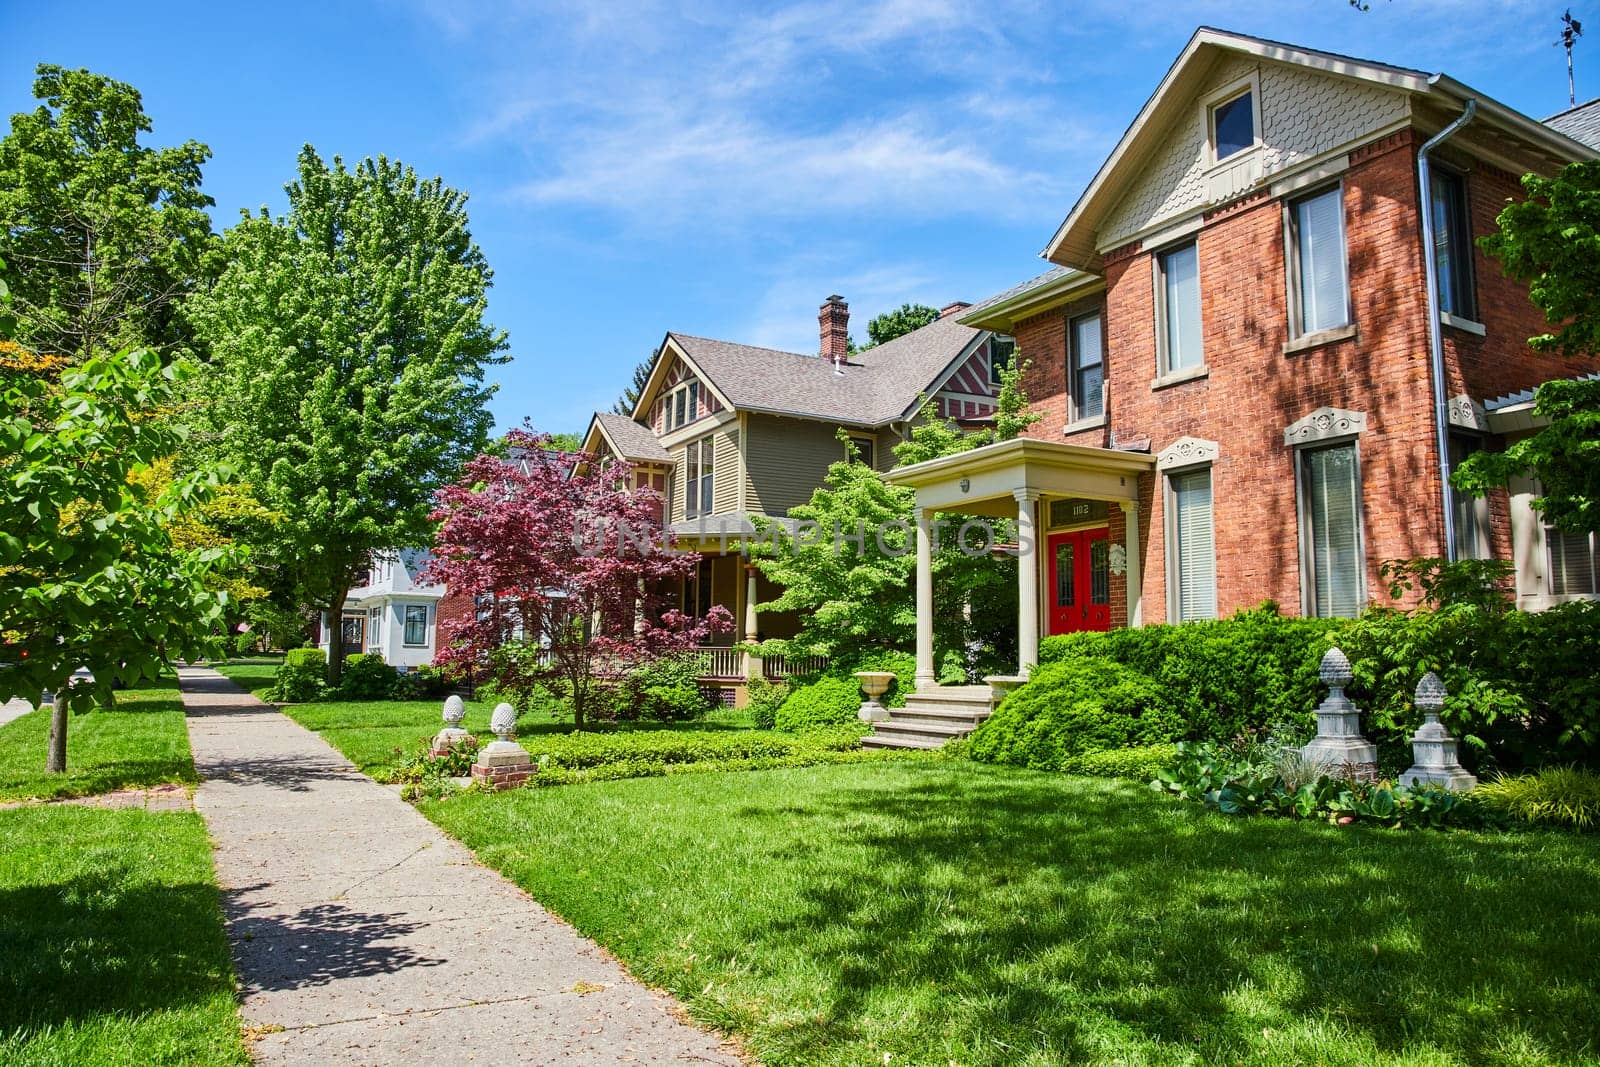 Charming homes in Fort Wayne: Victorian elegance meets modern craft on a sunny suburban street.